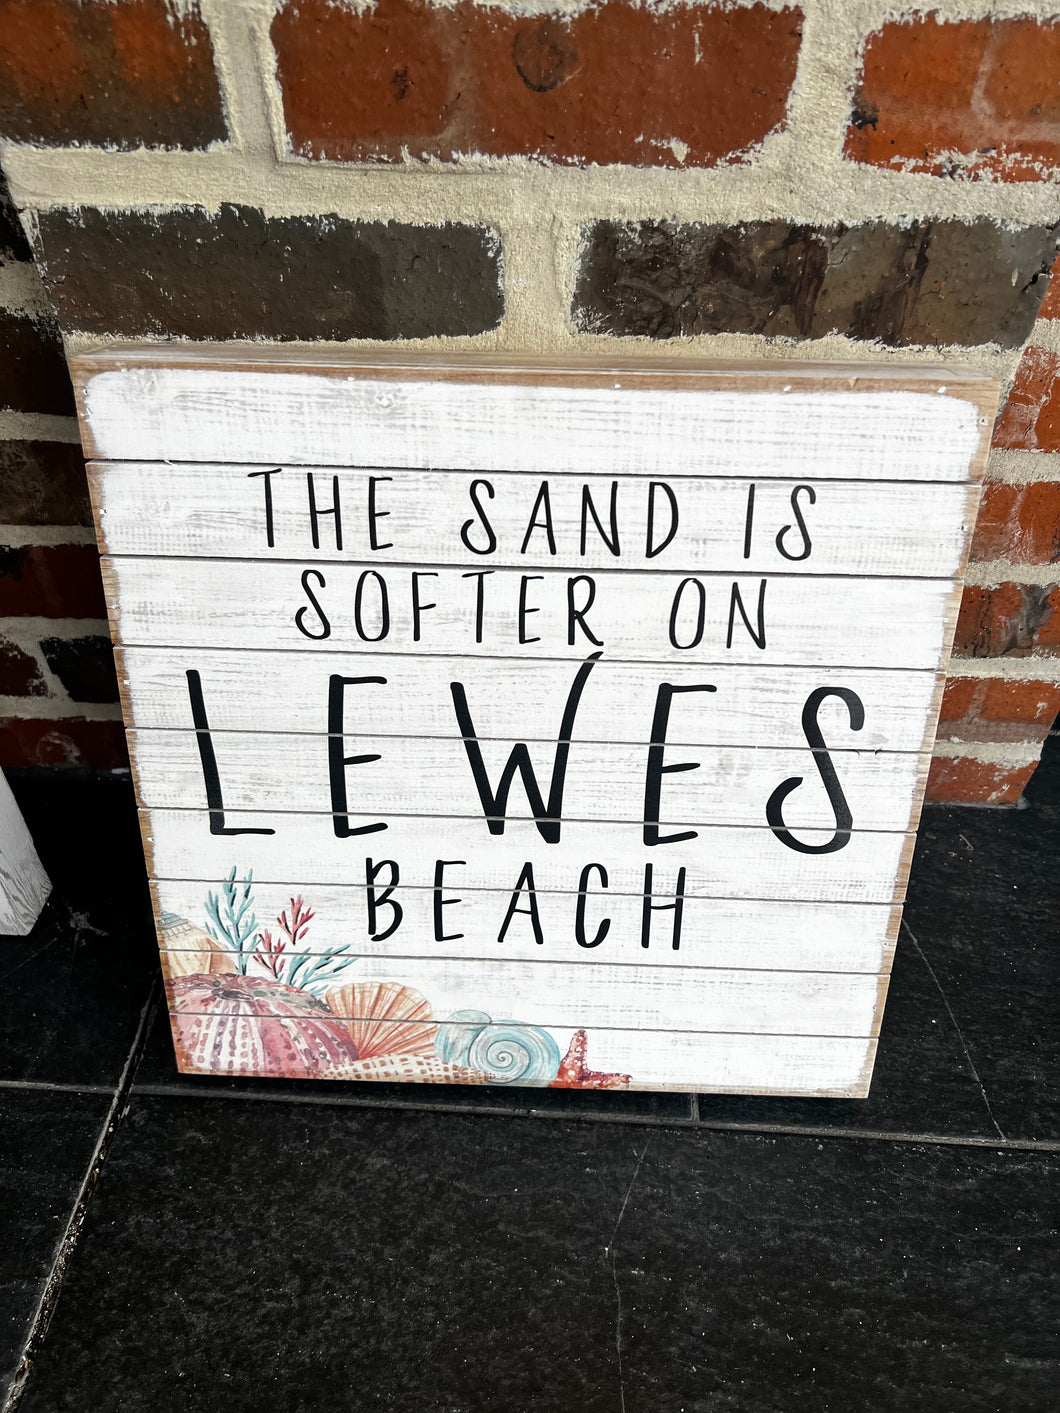 THE SAND IS SOFTER IN LEWES BEACH